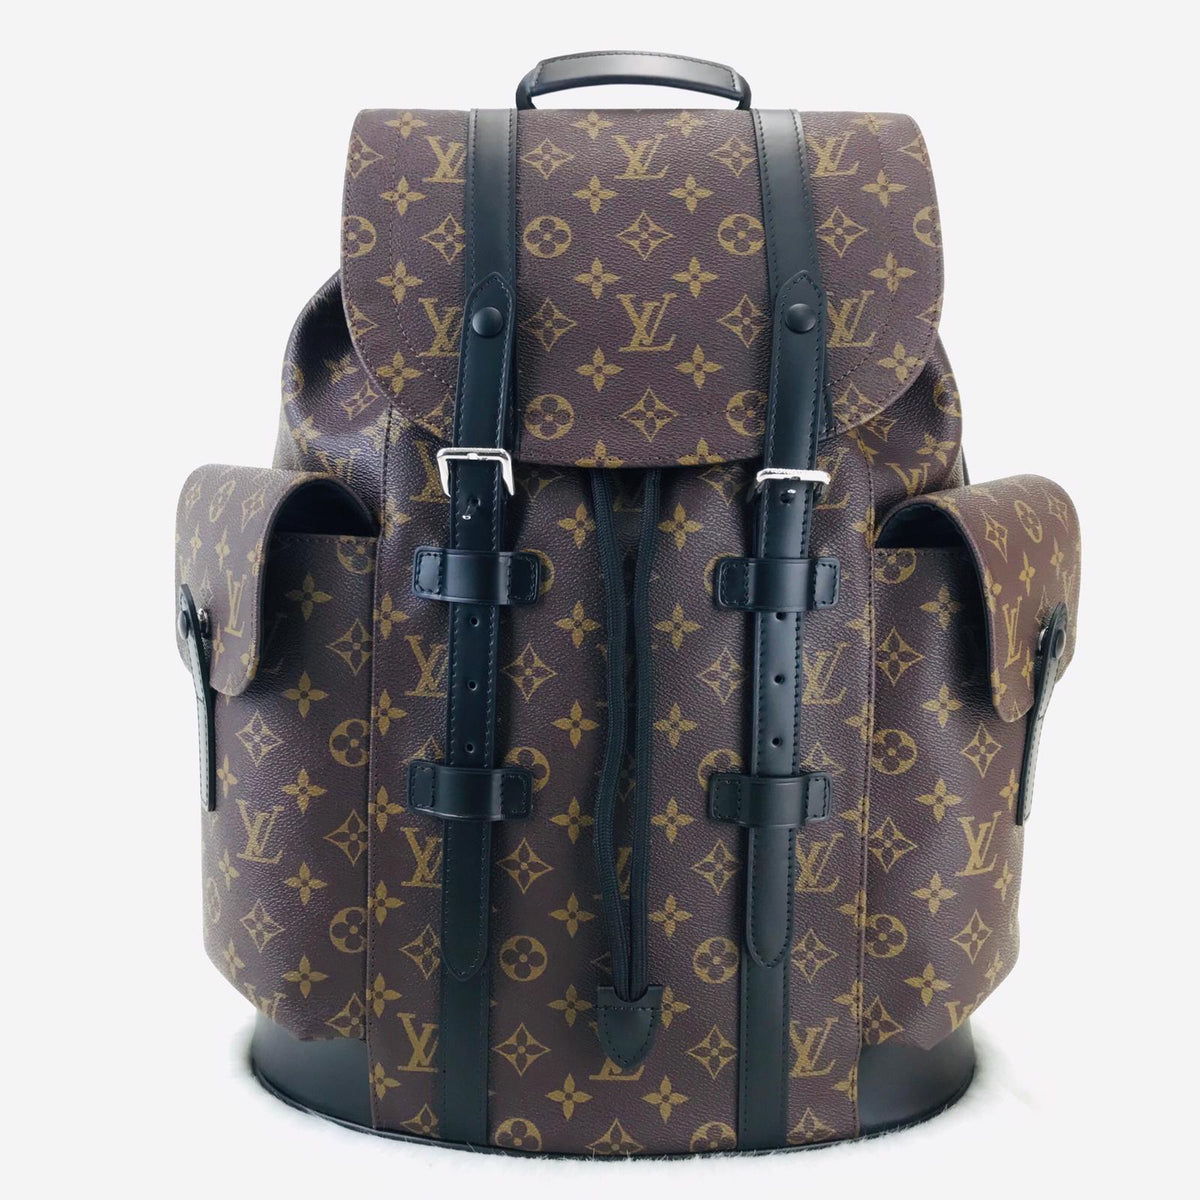 Louis Vuitton Christopher Backpack – World Leather Design